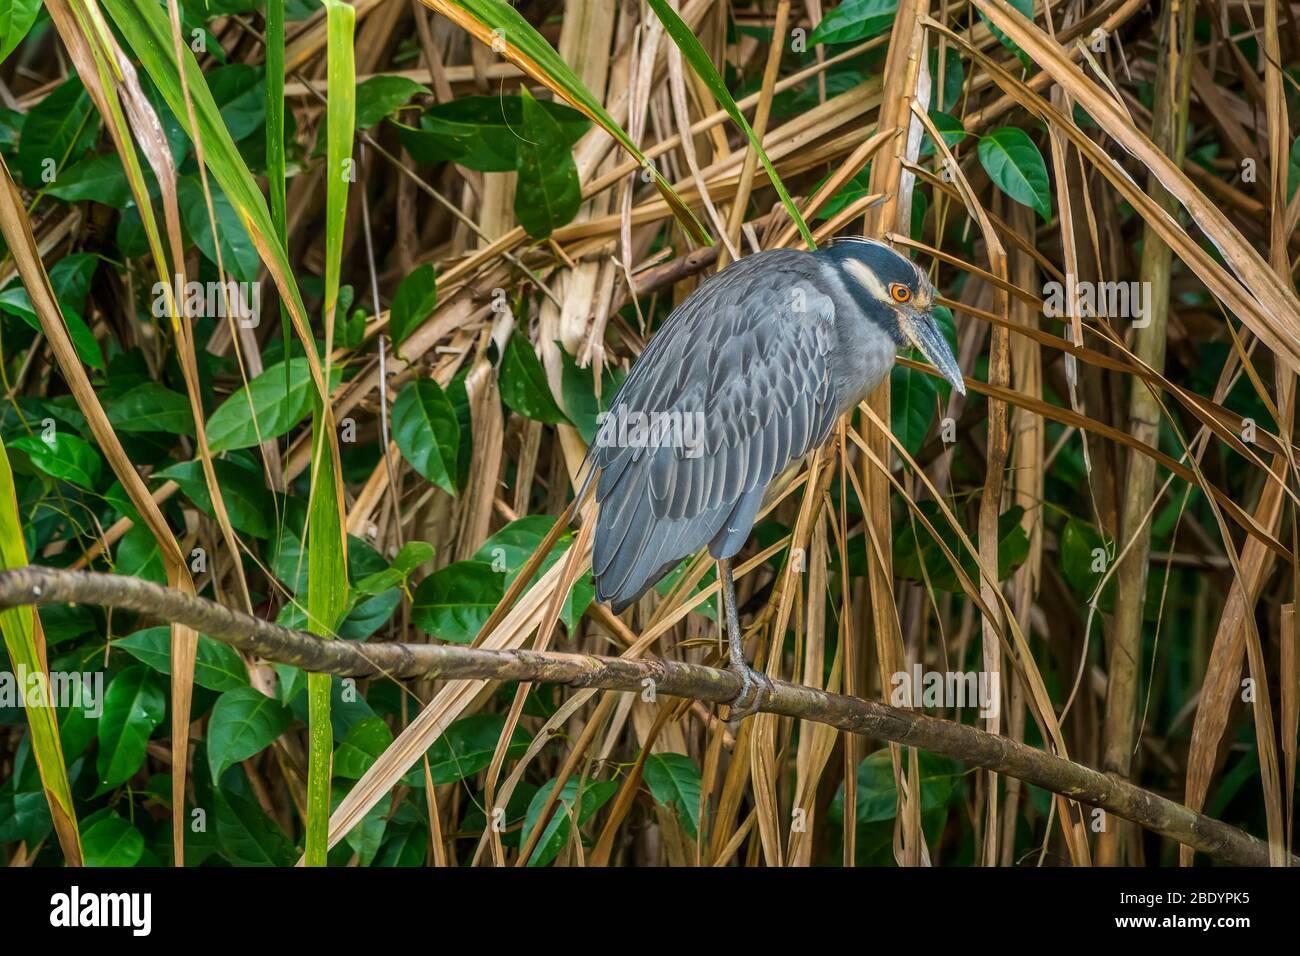 Yellow Crowned Night Heron (nyctanassa violacea), Tortuguero canals, Costa Rica, Central America Stock Photo